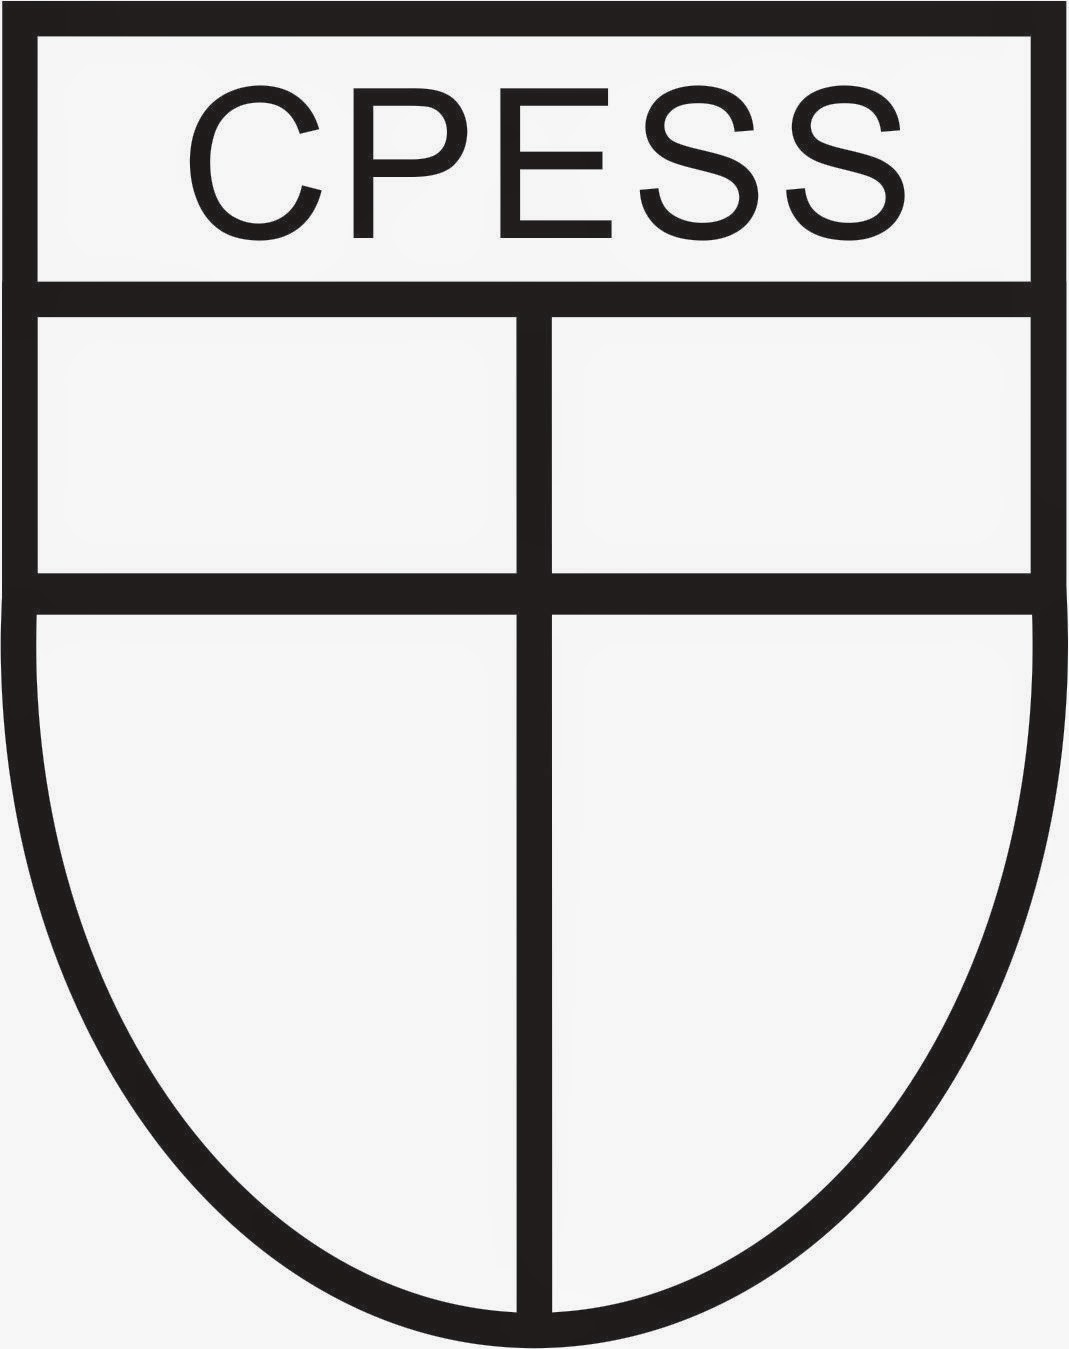 CPESS